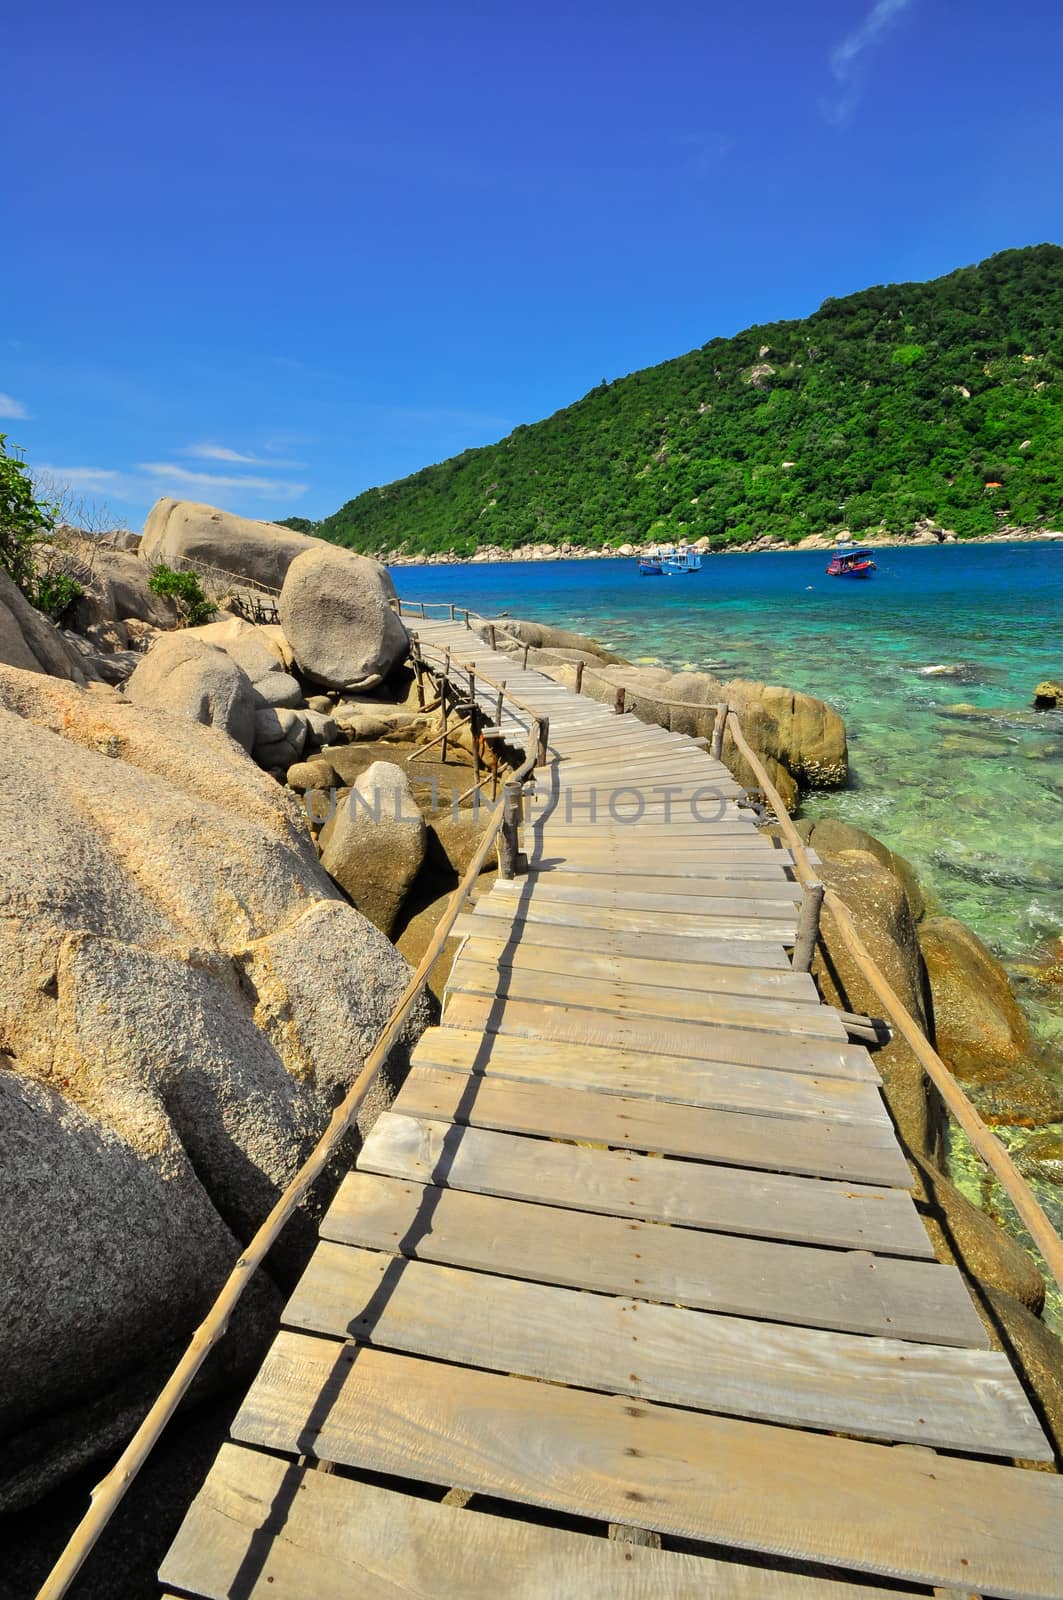 Thailand Boardwalk Perfect tropical bay on Koh Tao a paradise island in Asia.